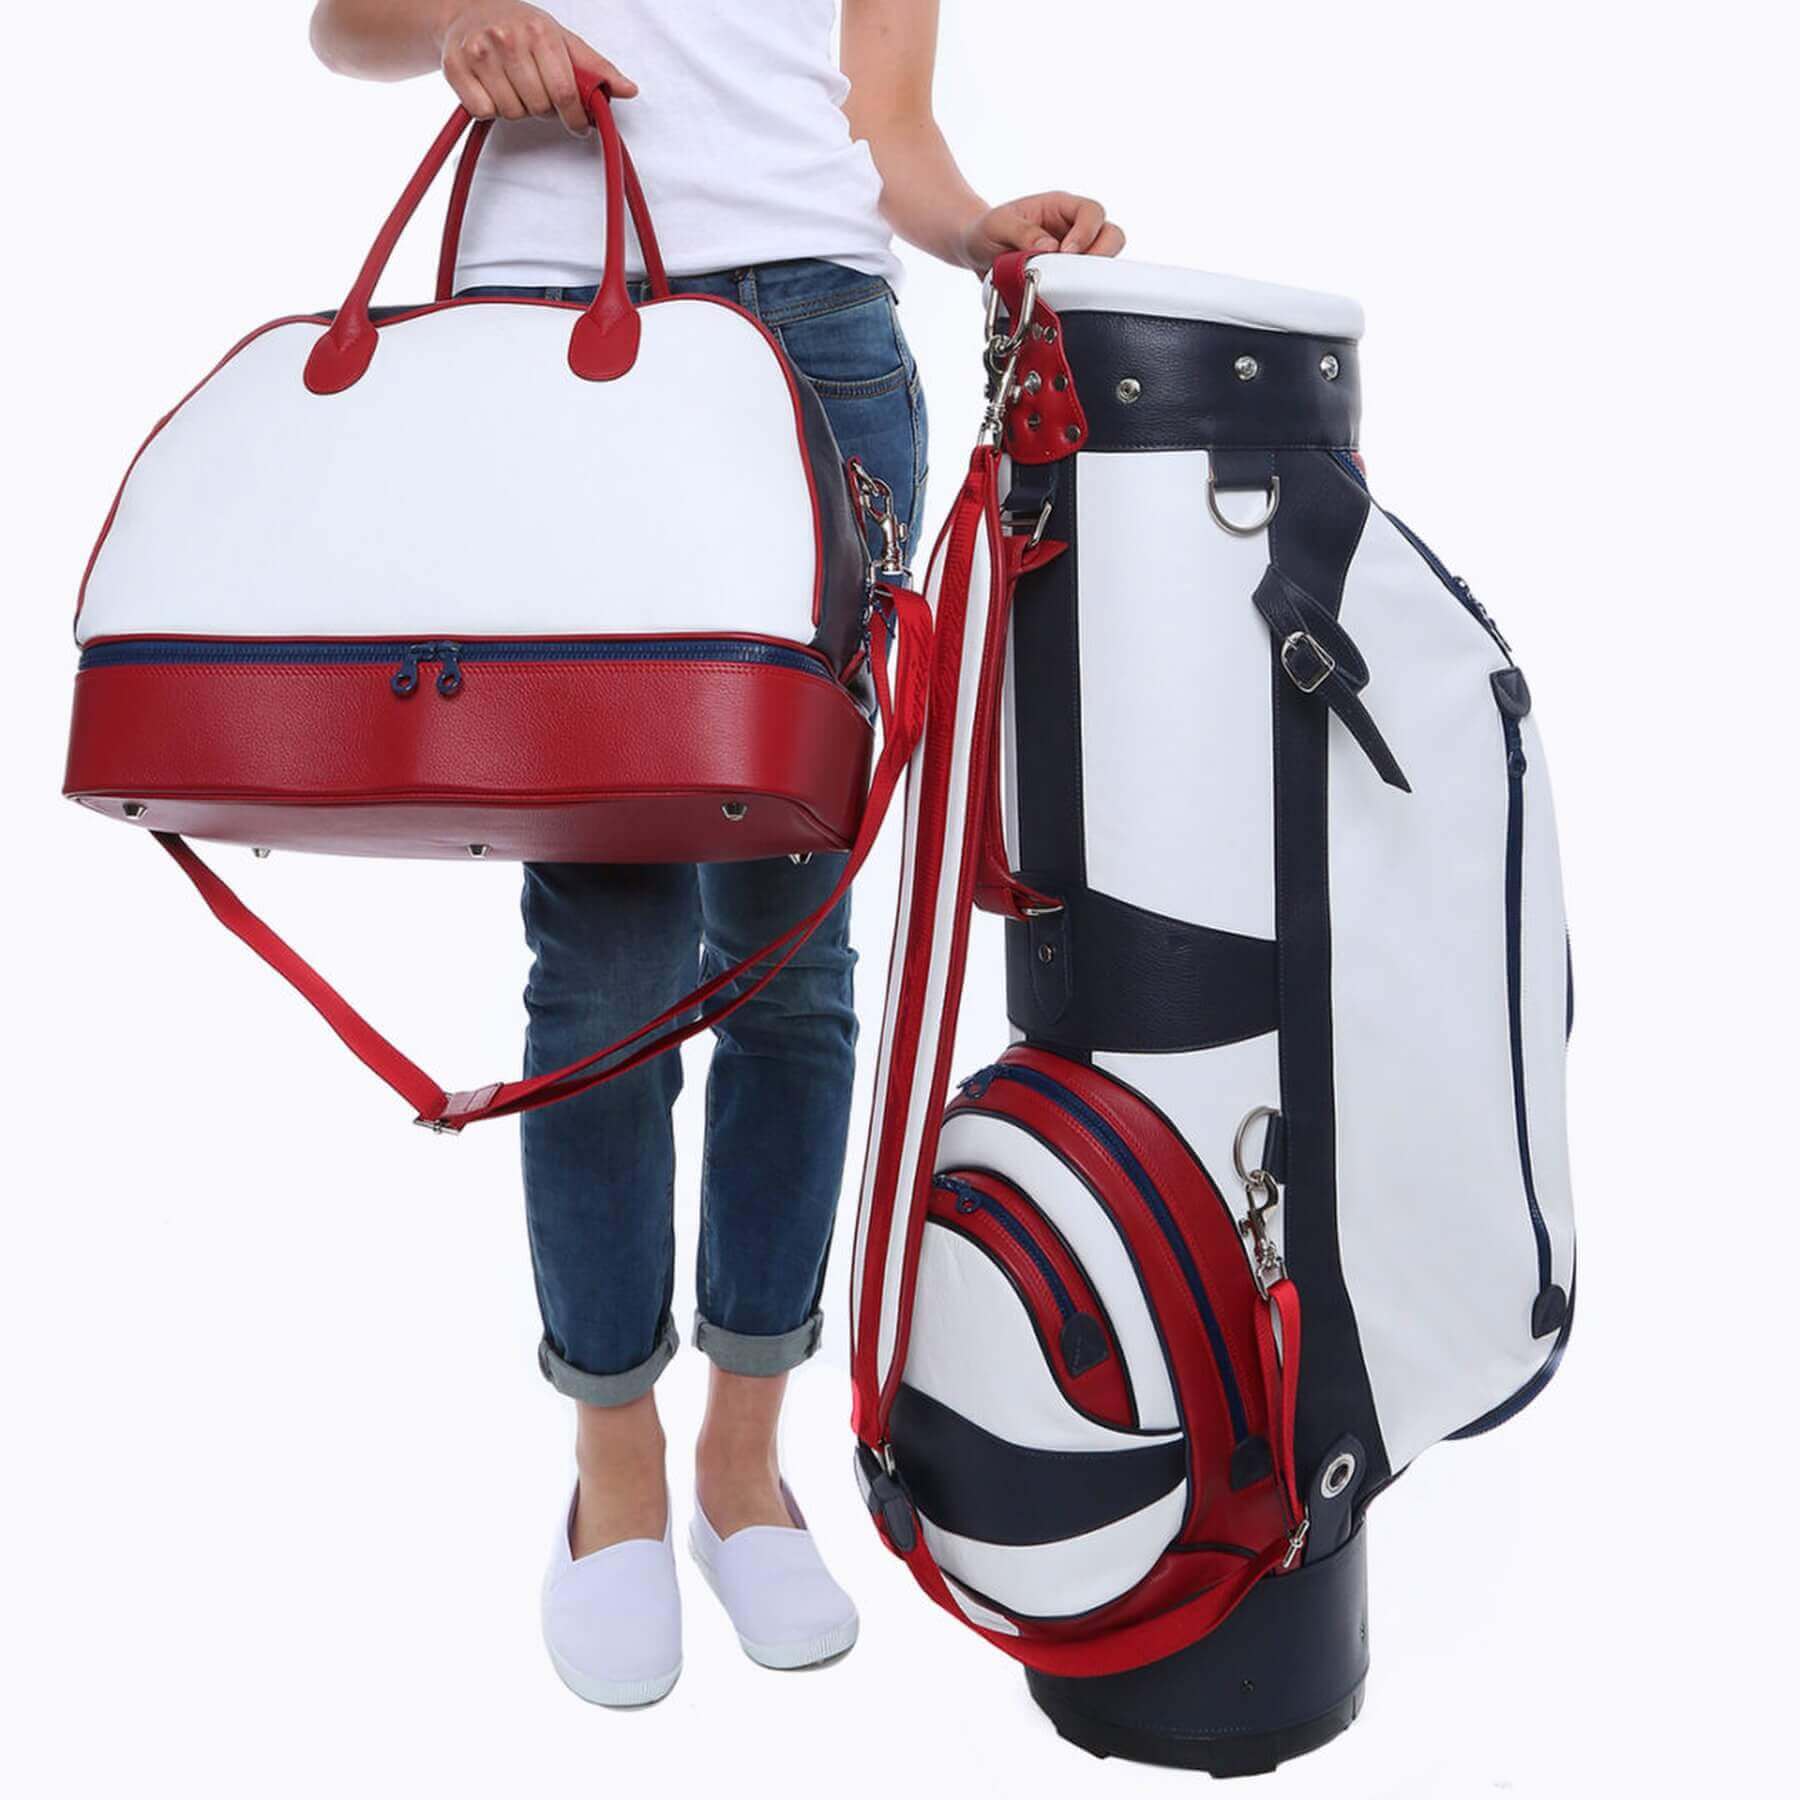 terrida leather bags made in Italy genuine leather sport tennis golf padel pickleball italian bag italian bags made in italy leather tennis bag, leather padel bag, leather pickleball bag